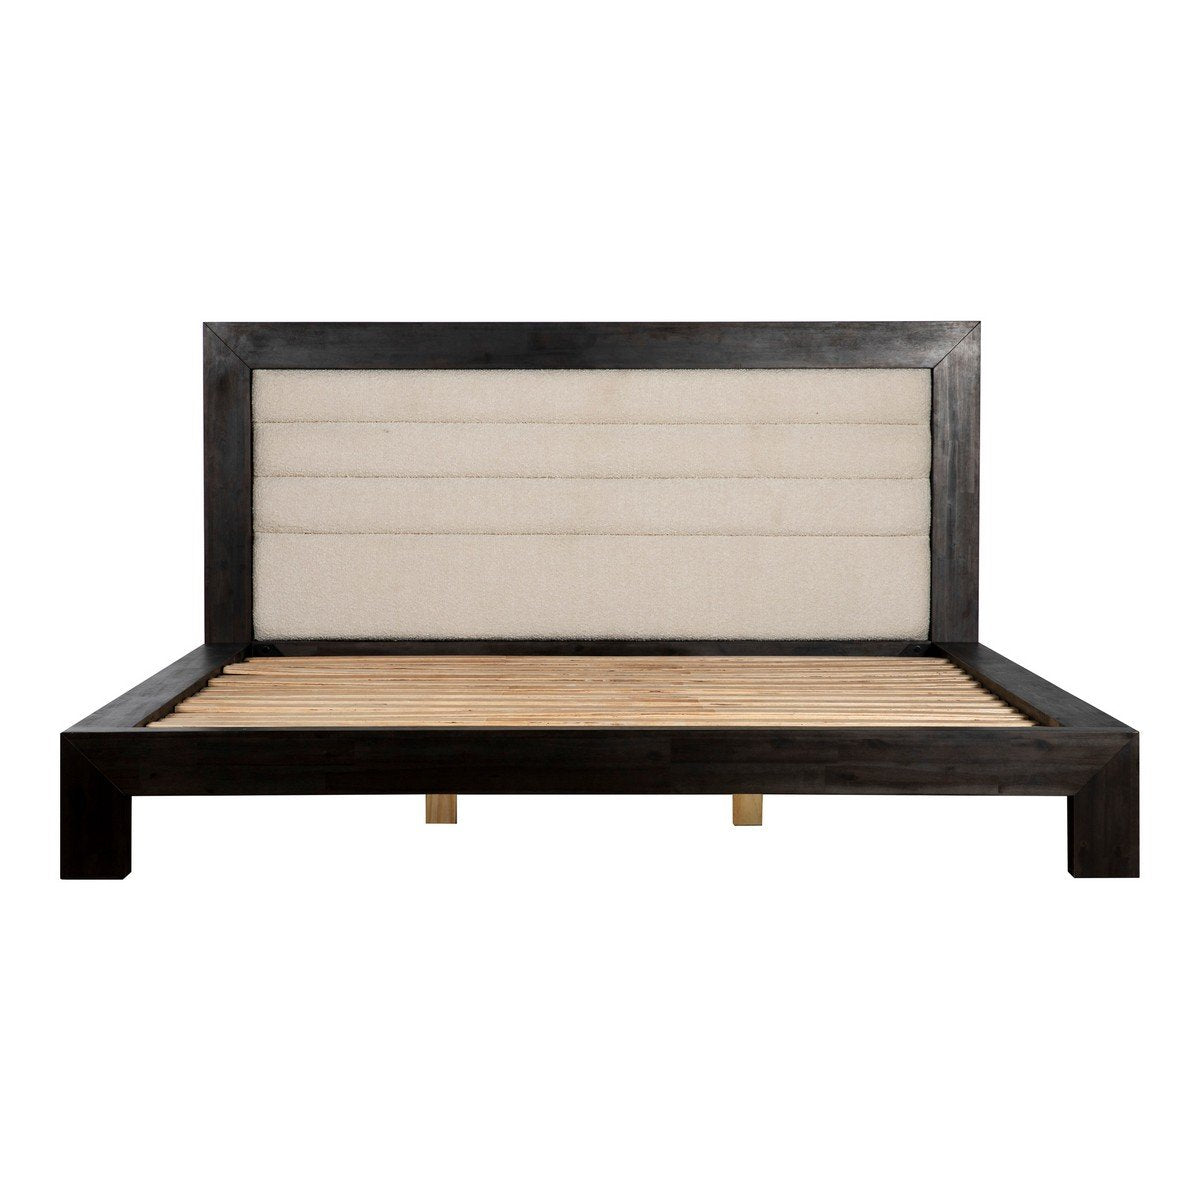 Moe's Home Collection Ashcroft King Bed - ZT-1031-25 - Moe's Home Collection - Beds - Minimal And Modern - 1